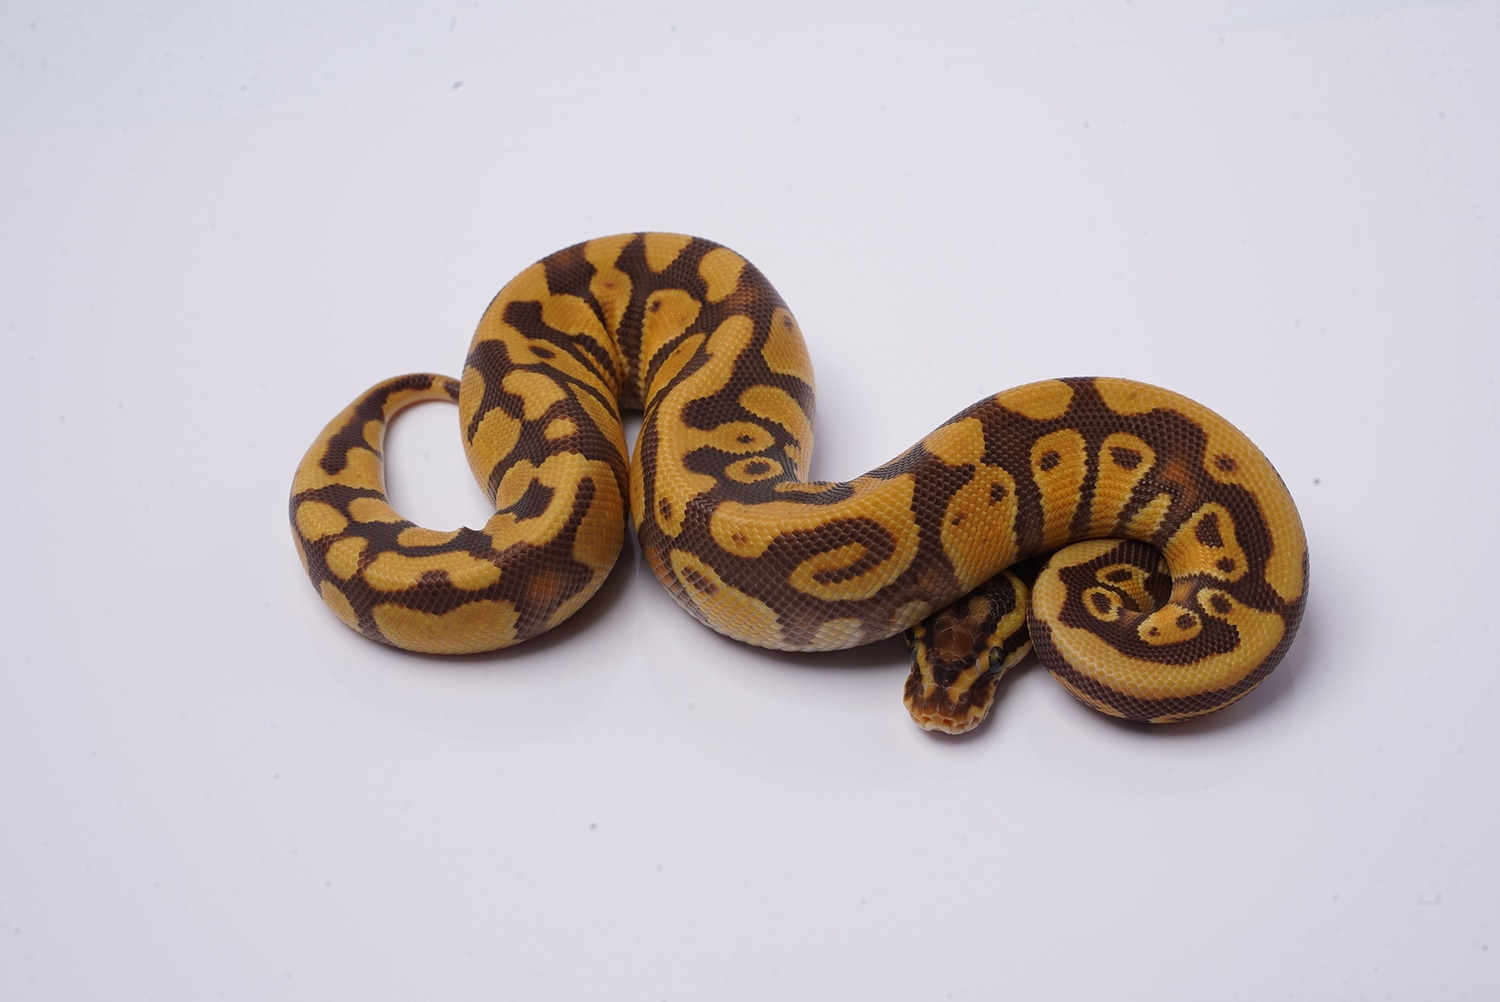 Enchi Pastel Yellow Belly Monarch 50%Het Pied Ball Python by Best Dressed Balls